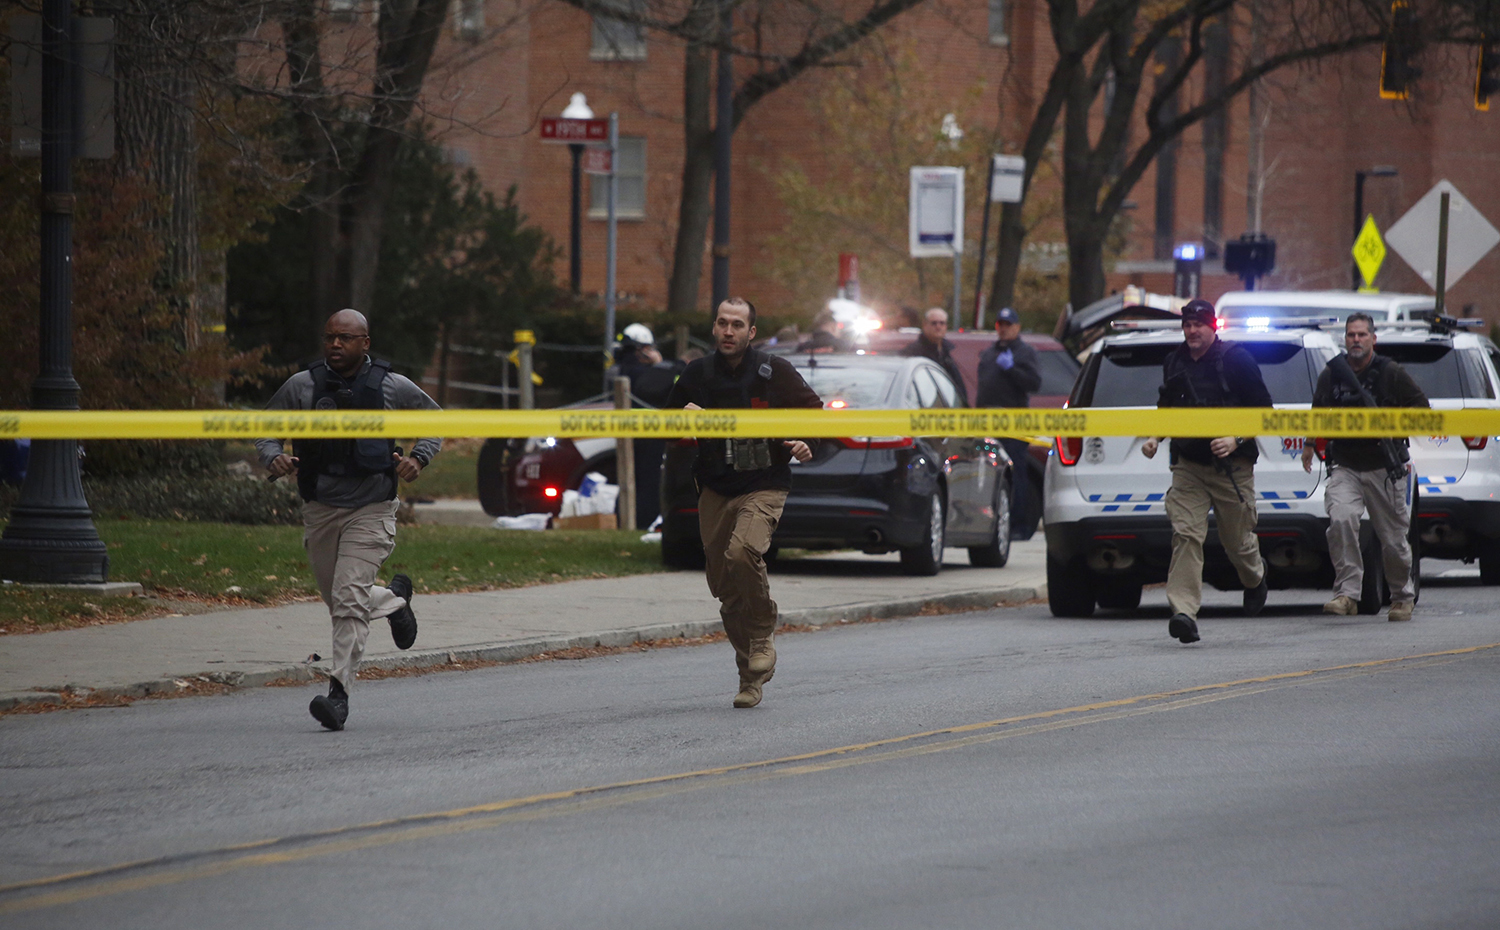 Police respond to reports of an attack on campus at Ohio State University on Monday, Nov. 28, 2016, in Columbus, Ohio. (Tom Dodge/The Columbus Dispatch via AP)